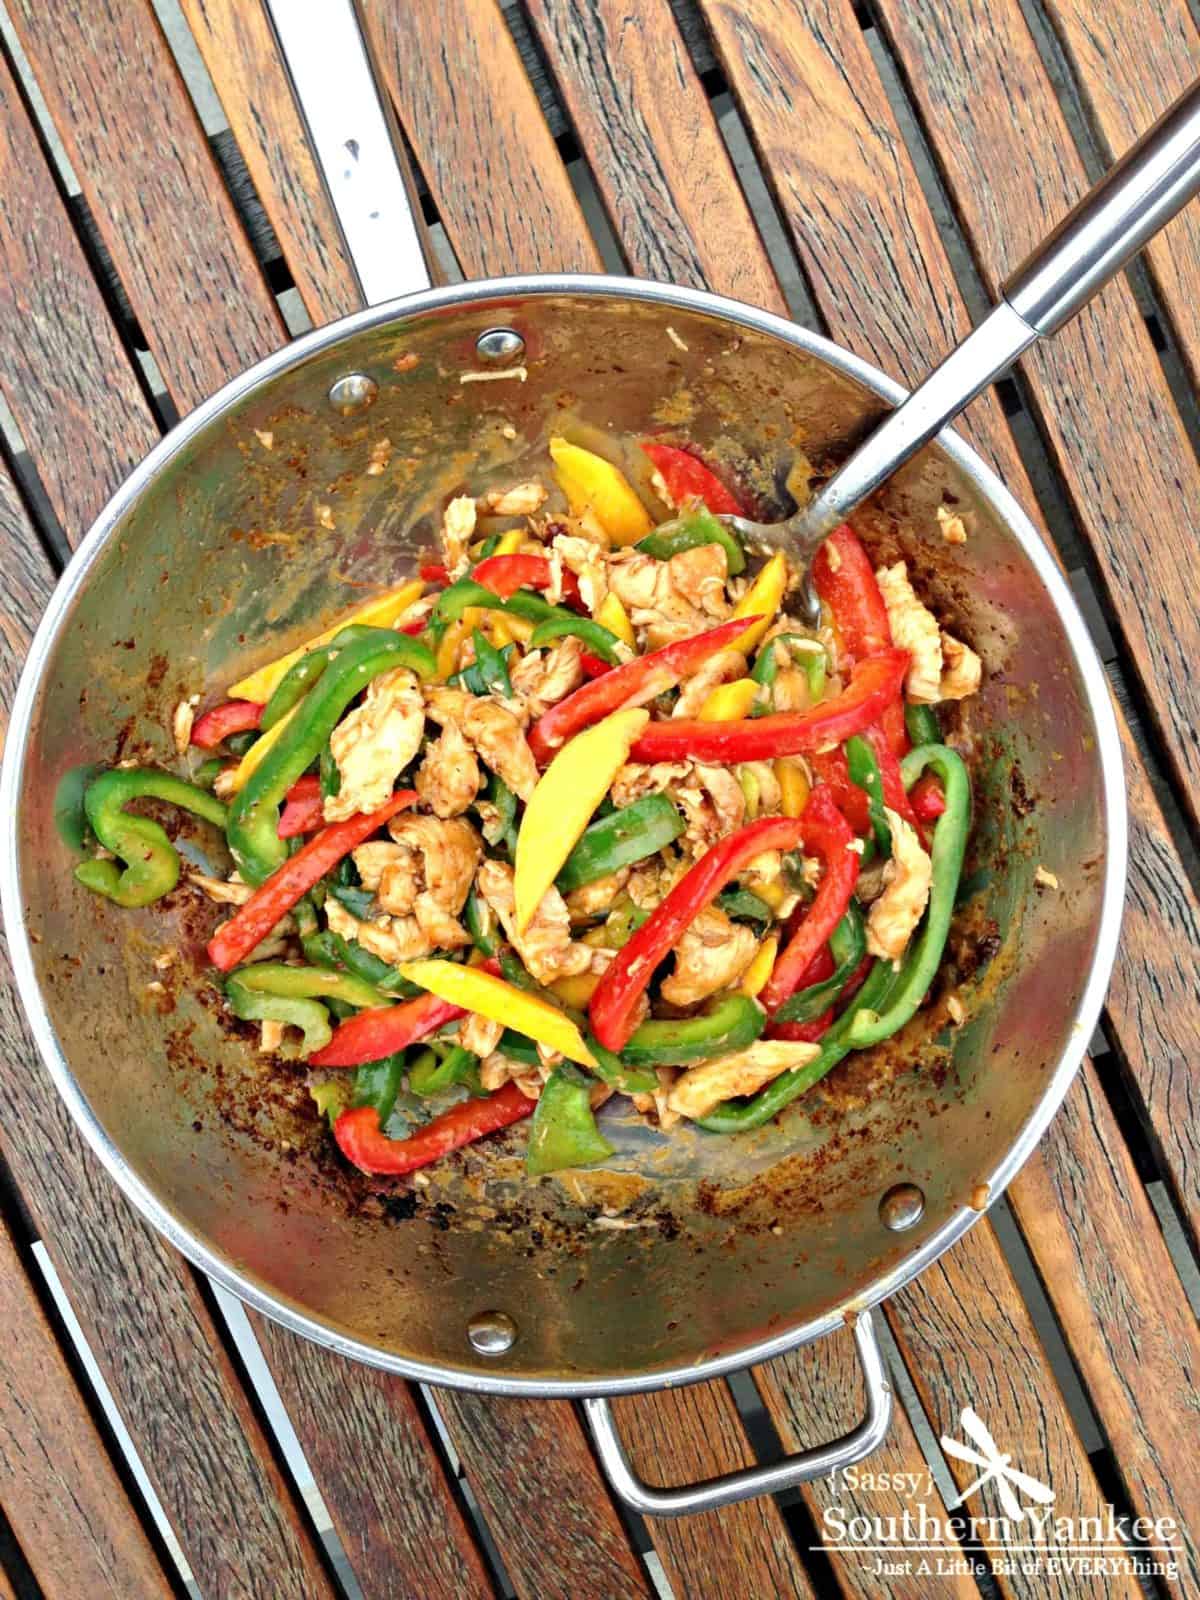 Stir-Fried-Chili-Mango-Chicken-With-Peppers-5